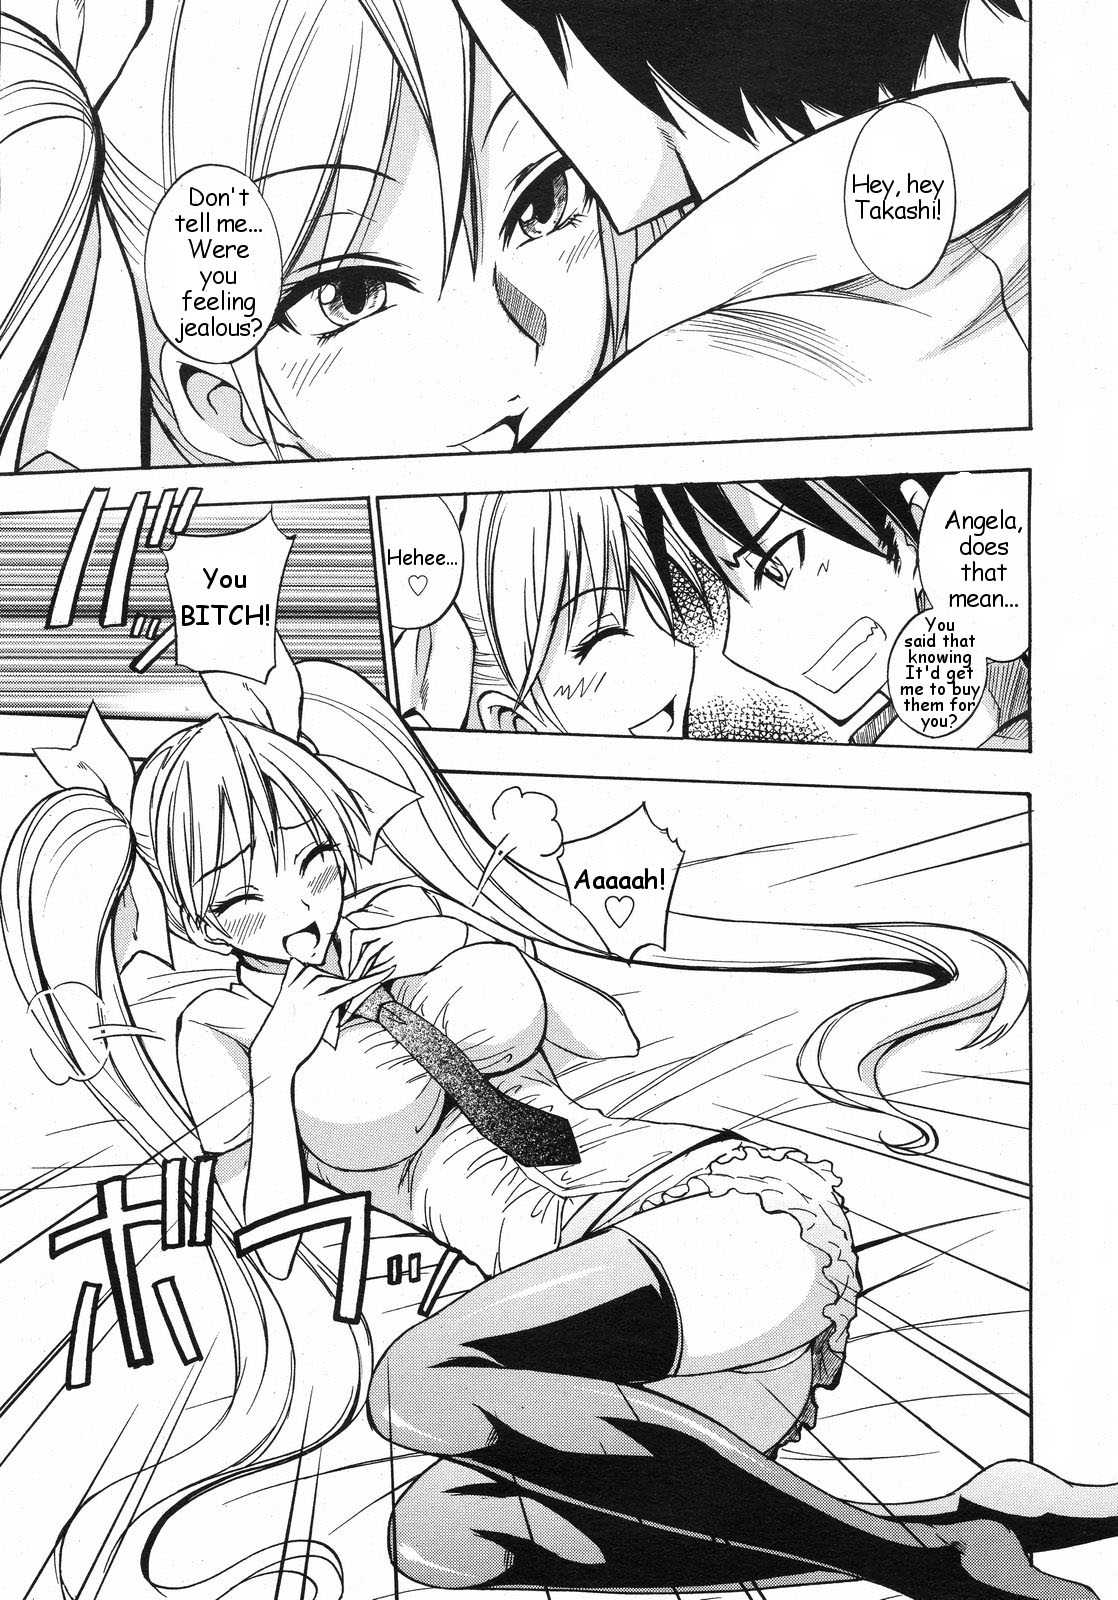 Tricky Twintails Girl (English) {Decensored} 